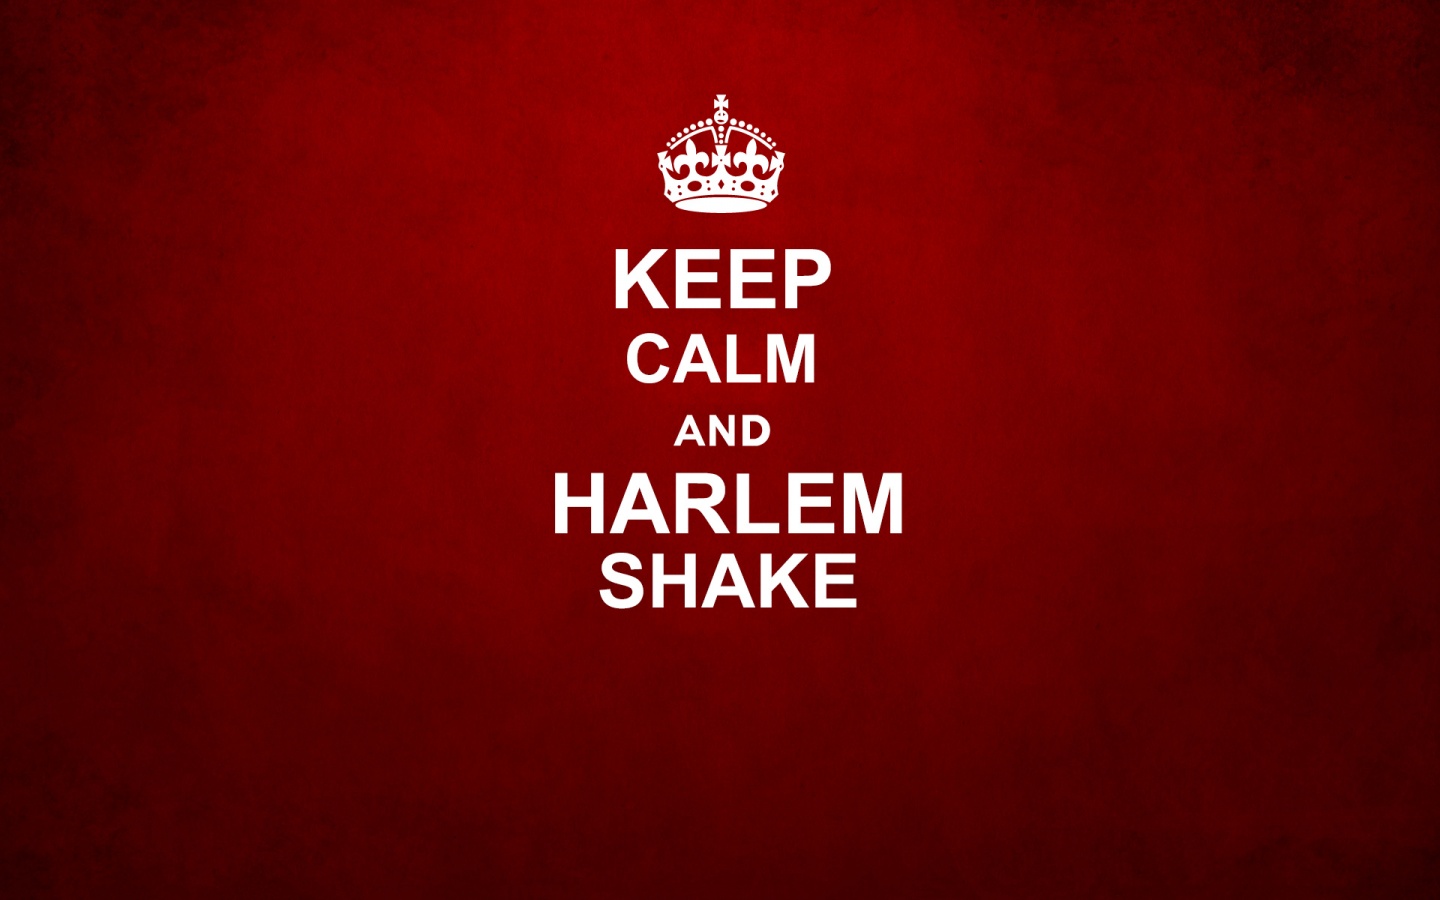 Download Keep Calm and Harlem Shake Wallpaper in 1440x900 Resolution 1440x900